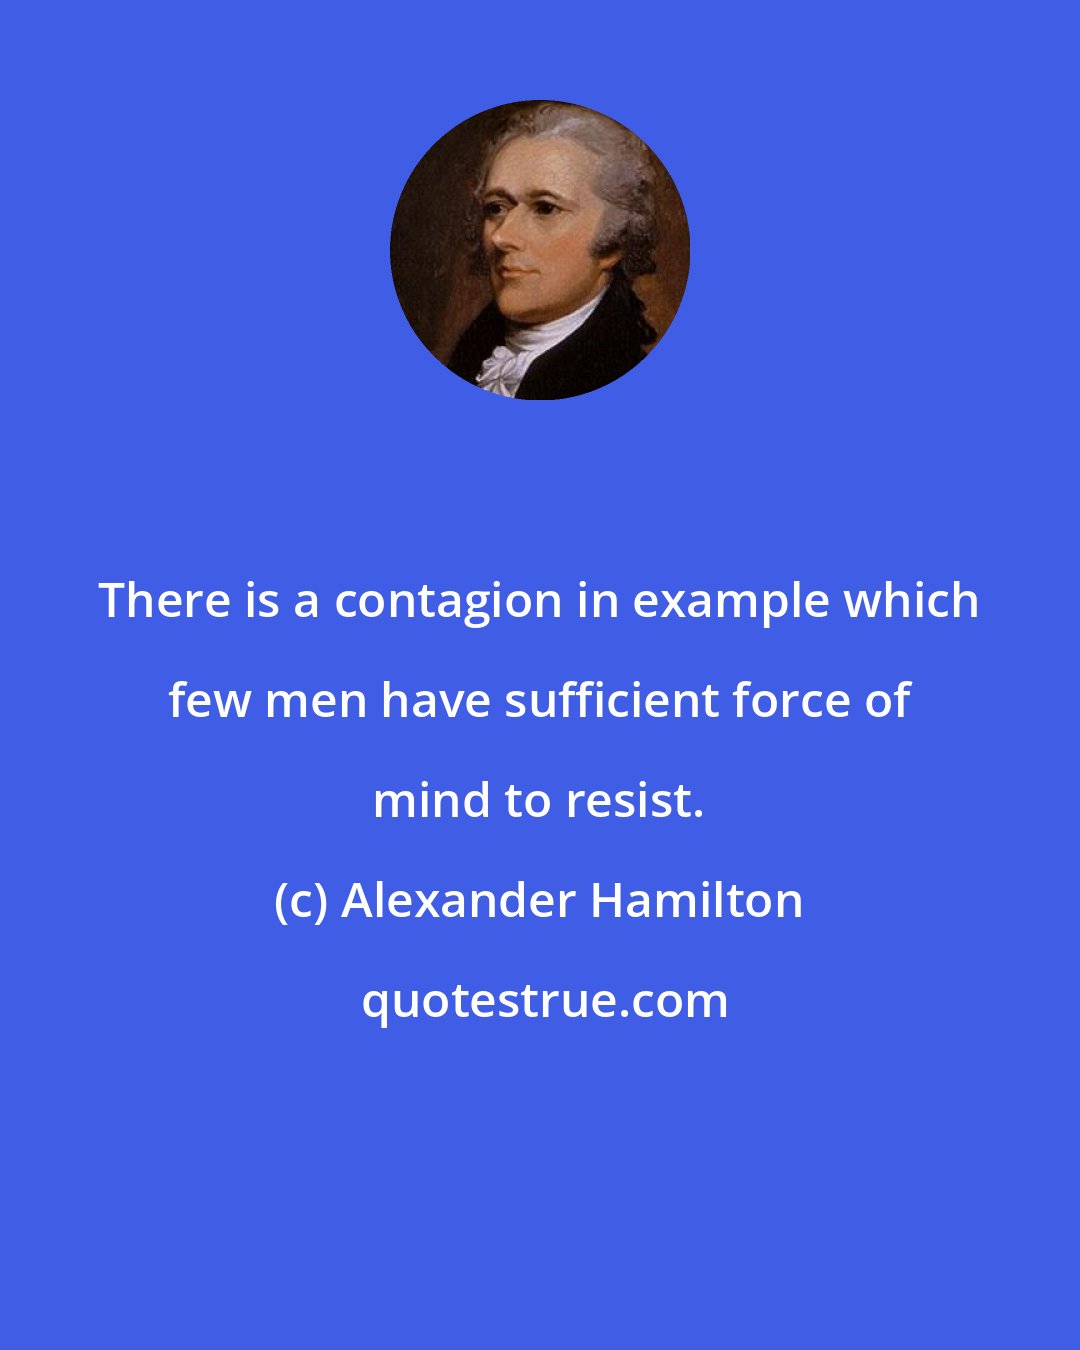 Alexander Hamilton: There is a contagion in example which few men have sufficient force of mind to resist.